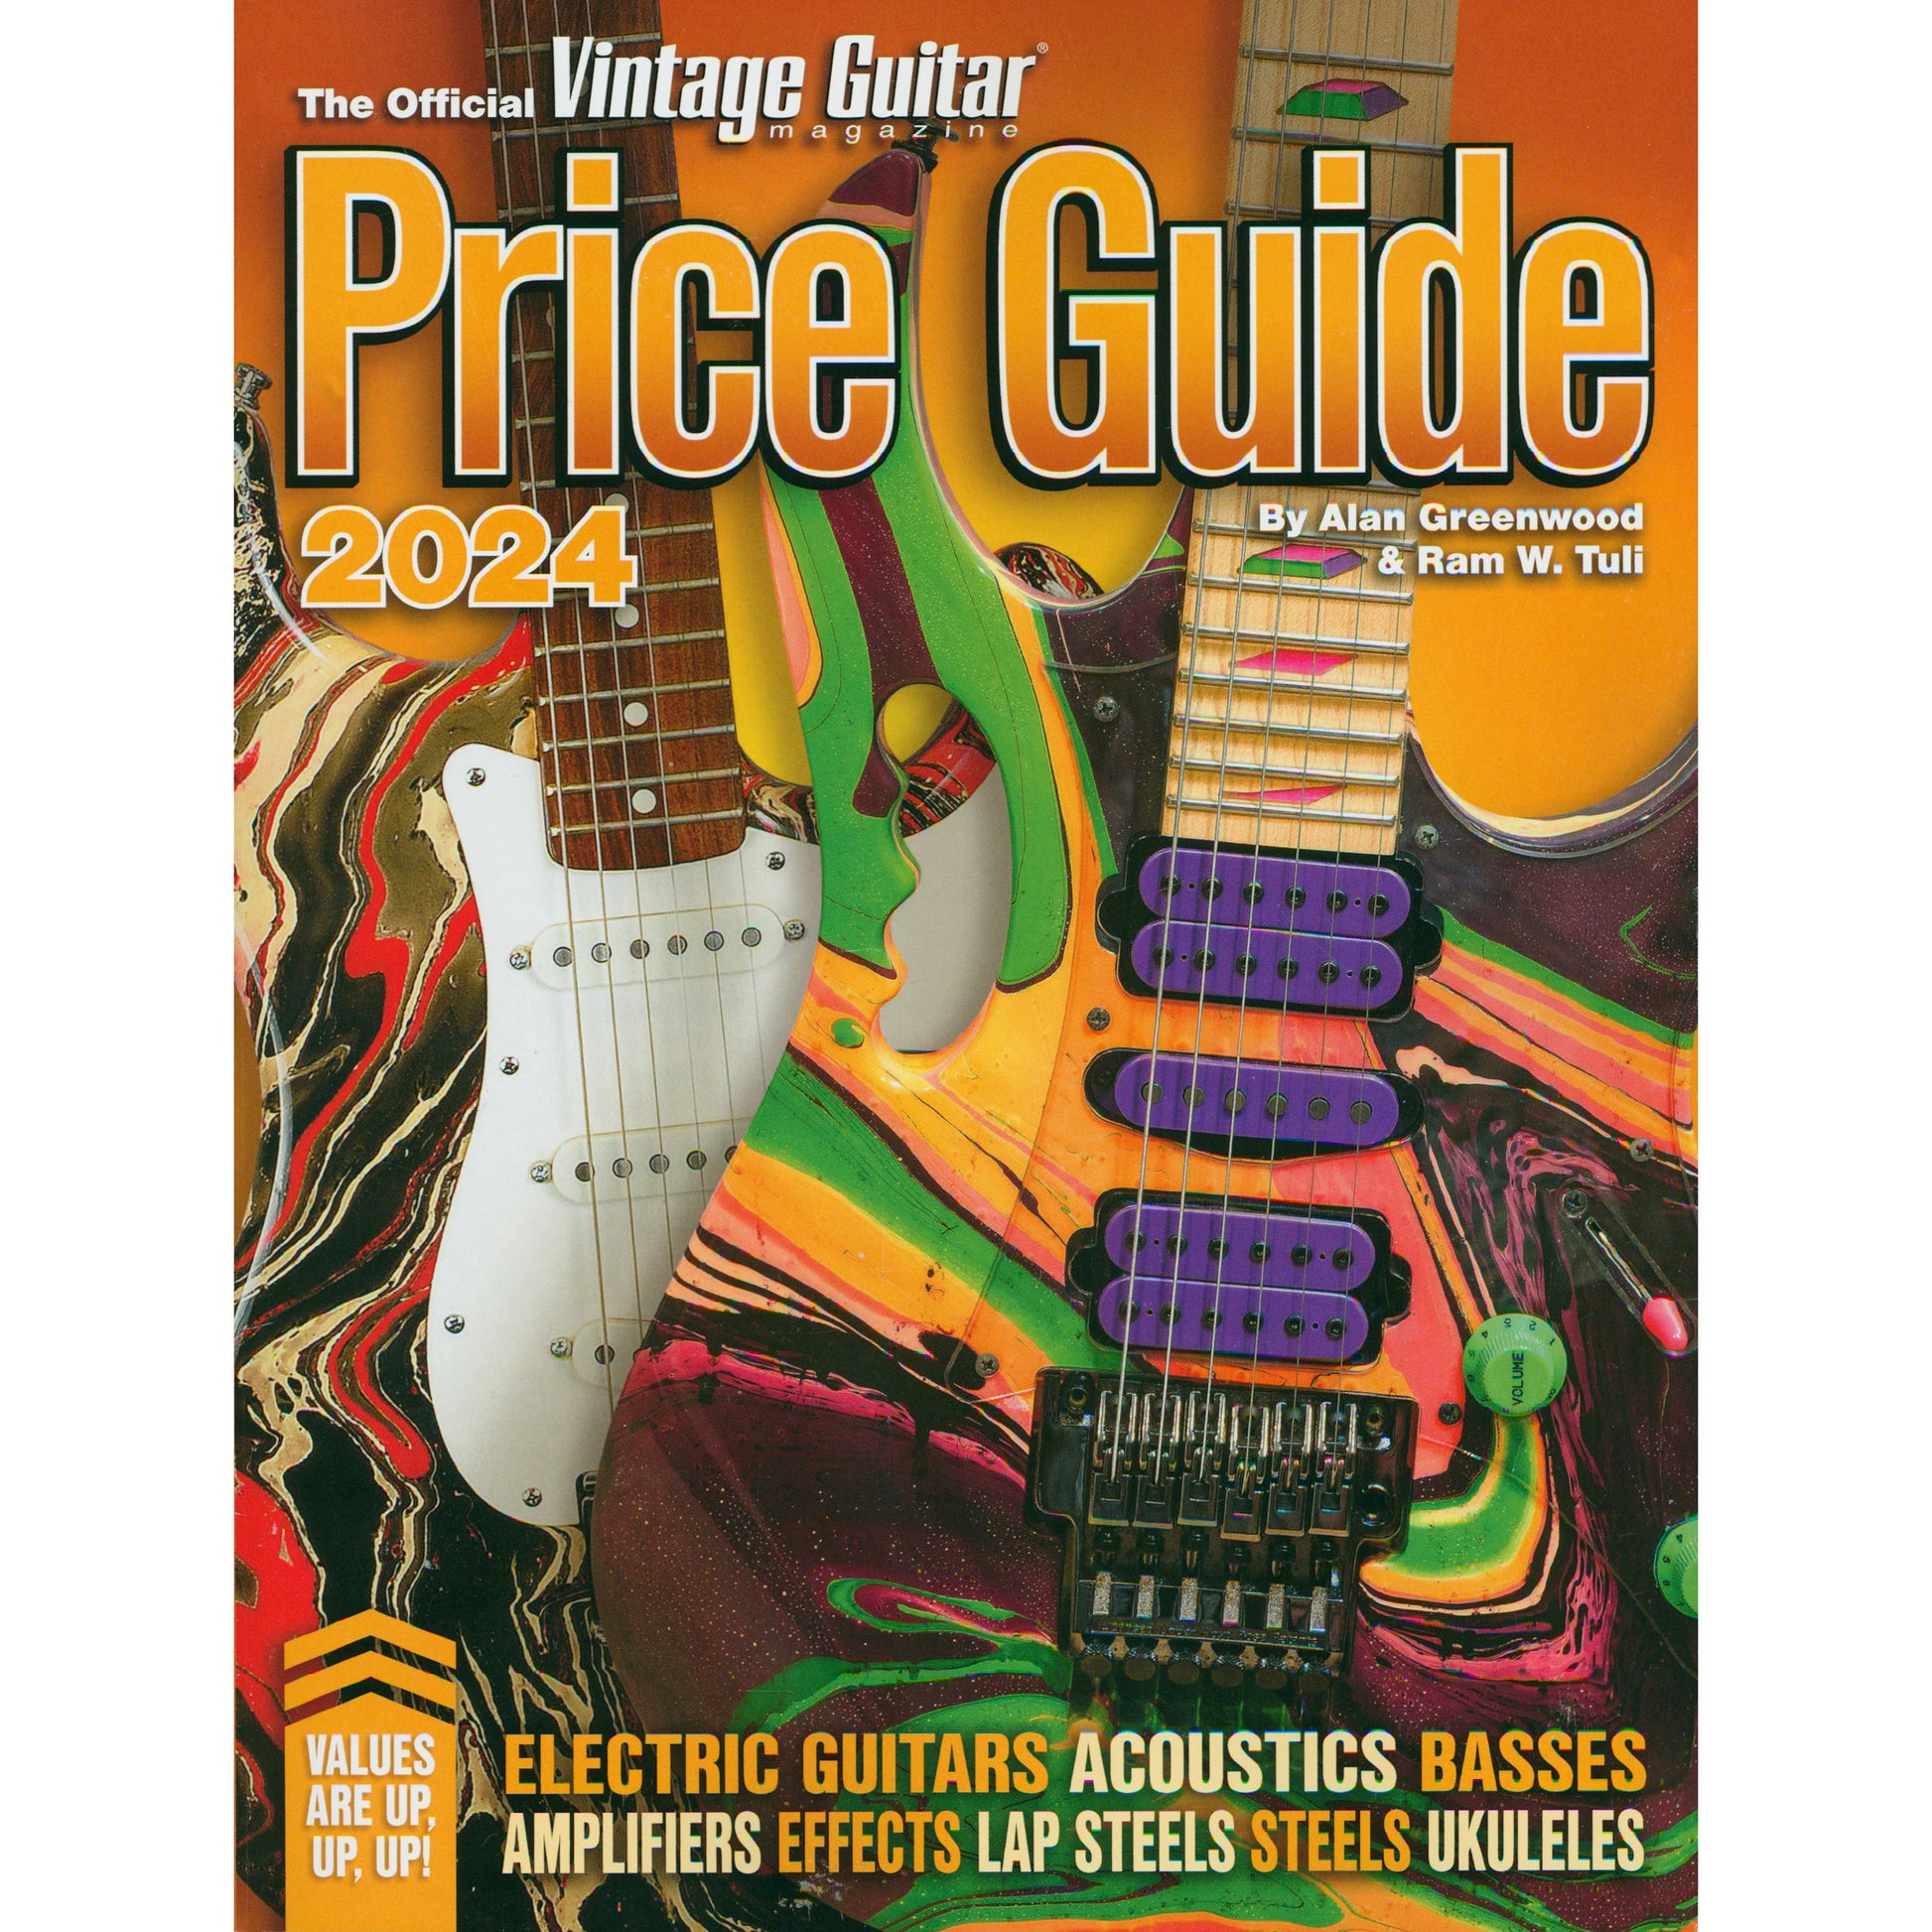 Image 1 : Cover of The Official Vintage Guitar Magazine Price Guide 2024 by Alan Greenwood & Ram W. Tuli SKU: 819-2